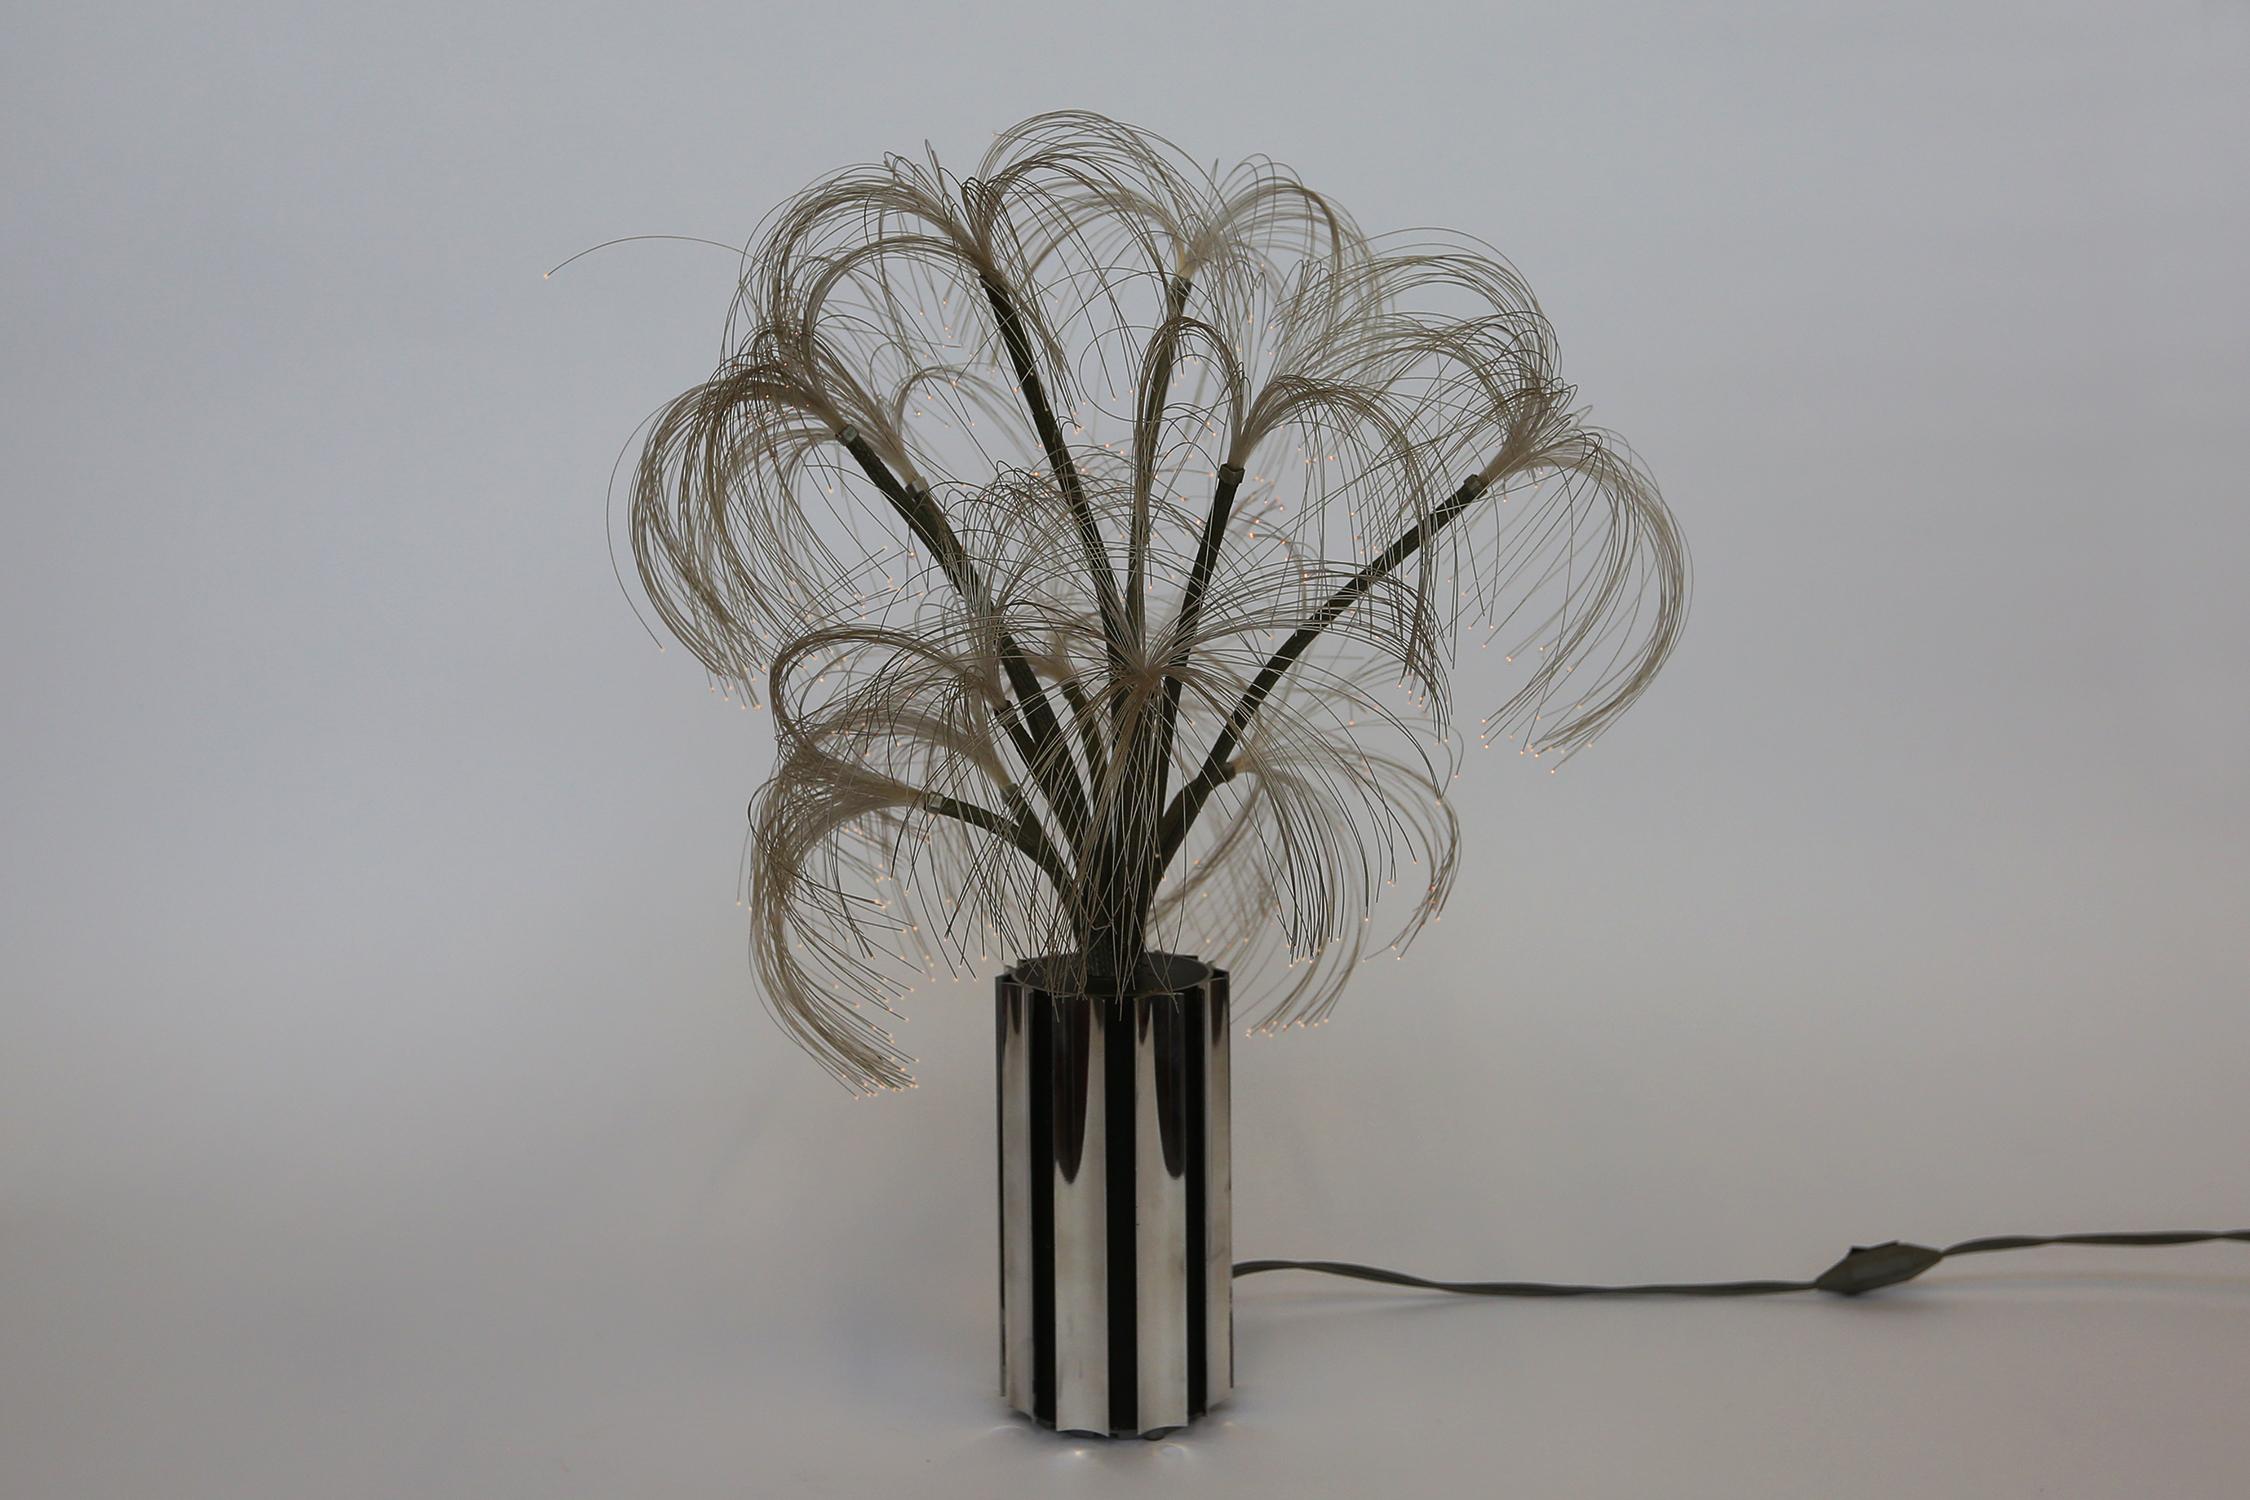 Atmospheric chrome table lamp, representing a palm tree. Chrome base with branches en at the end nylon wires. The end of the nylon wires lights up.